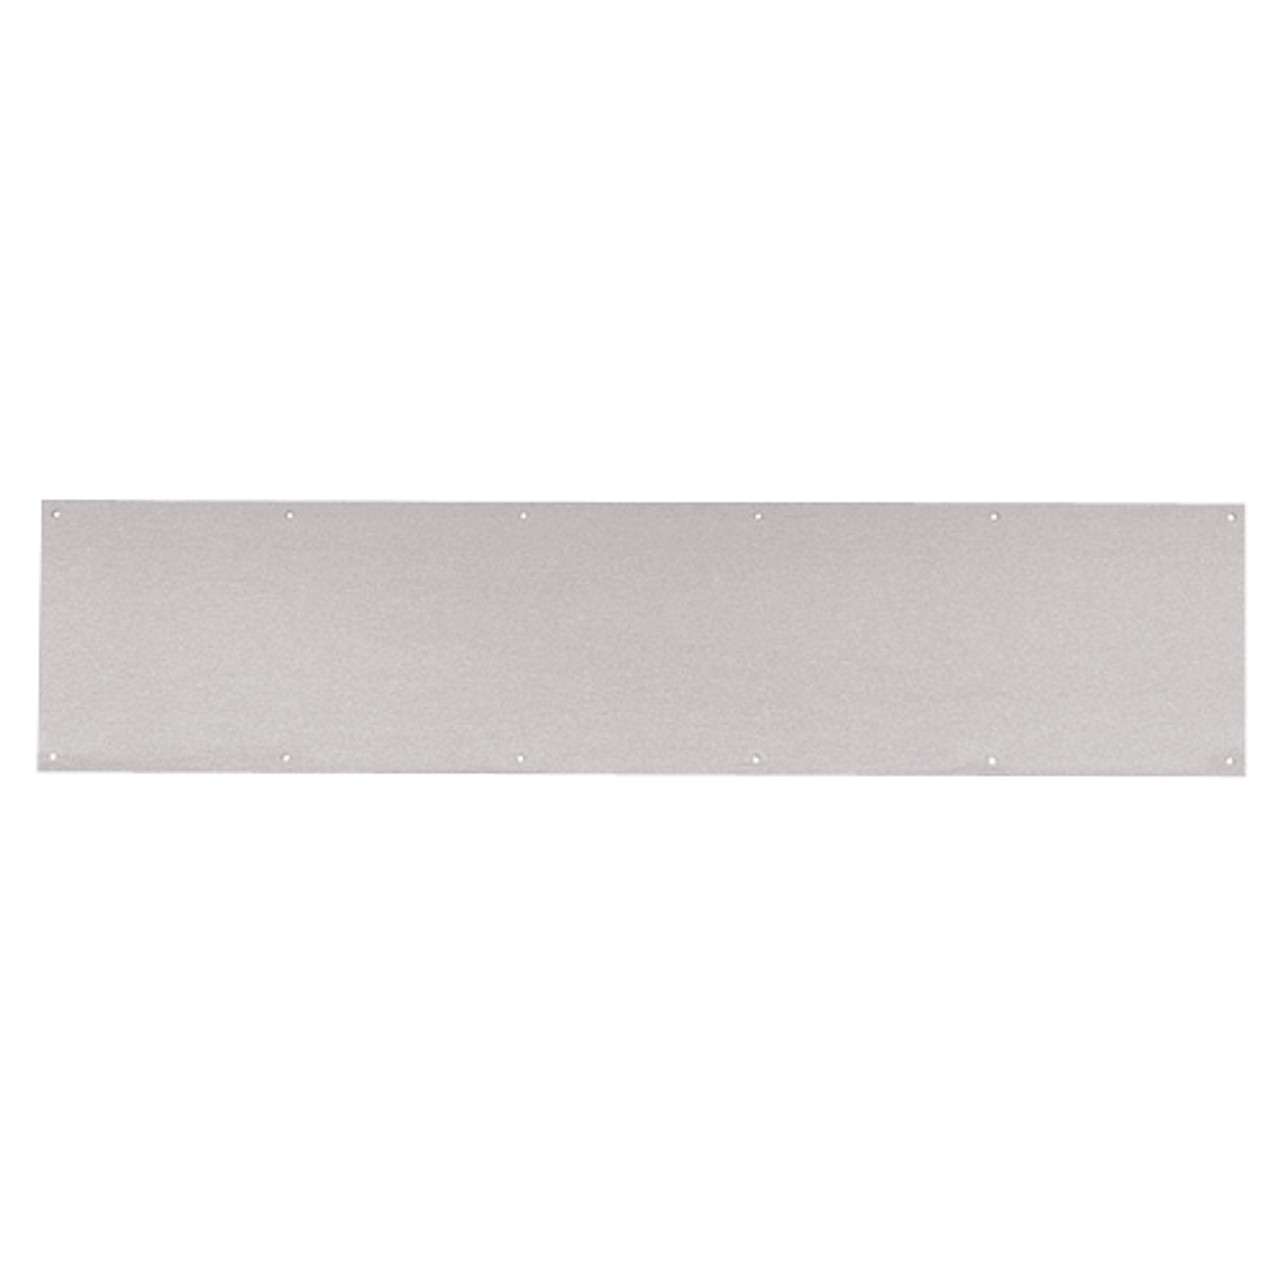 8400-US32D-12x35.5-B-CS Ives 8400 Series Protection Plate in Satin Stainless Steel